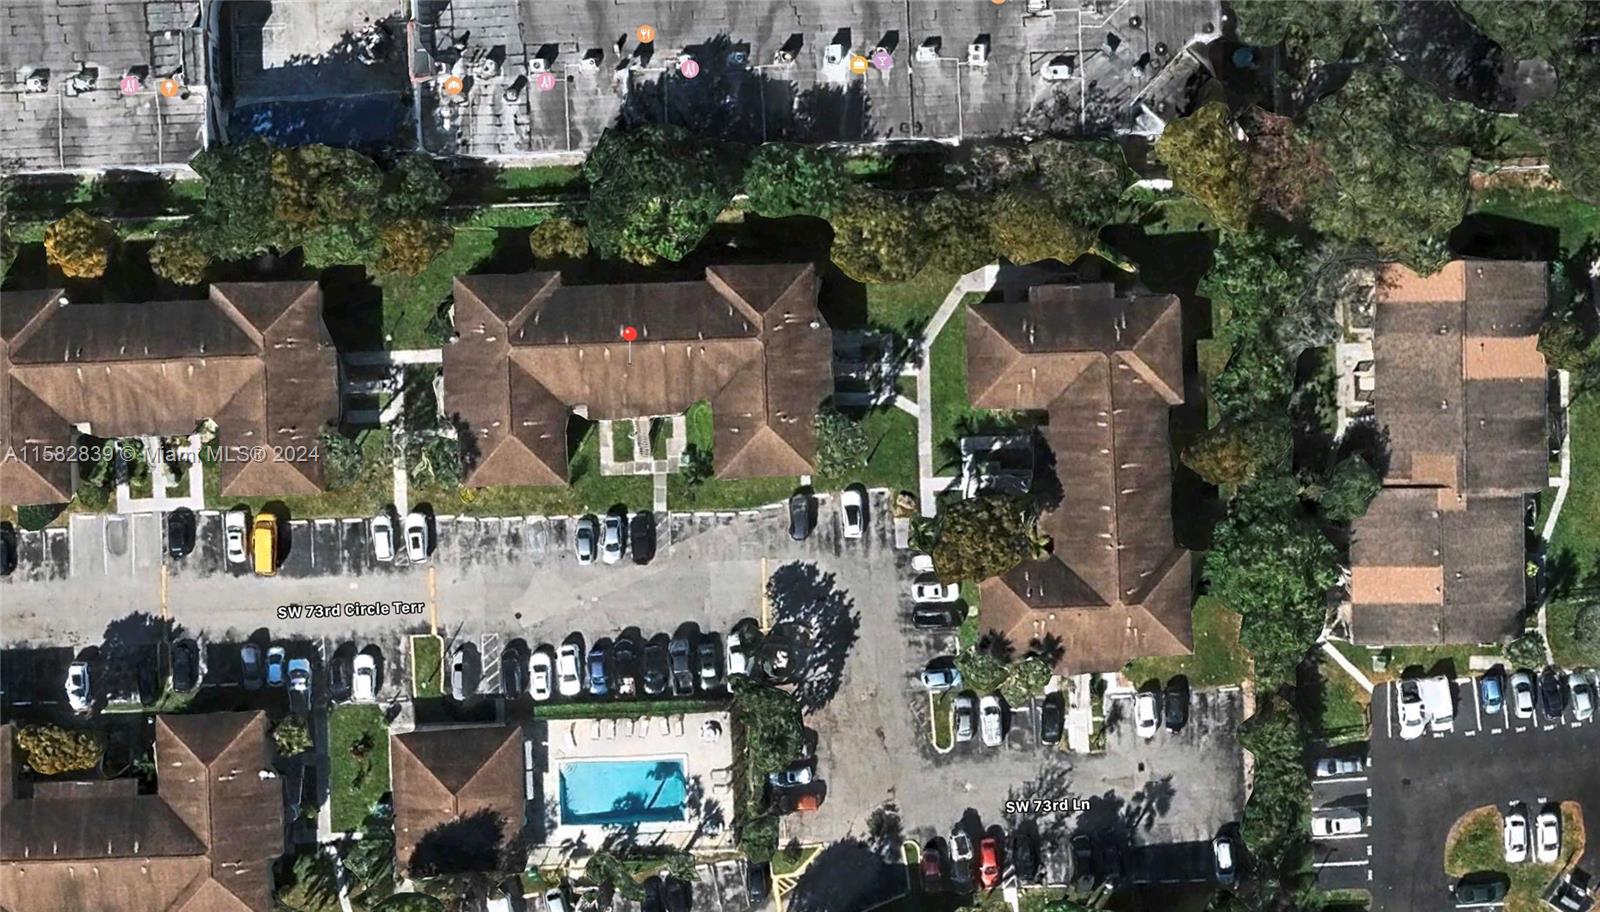 an aerial view of houses with outdoor space